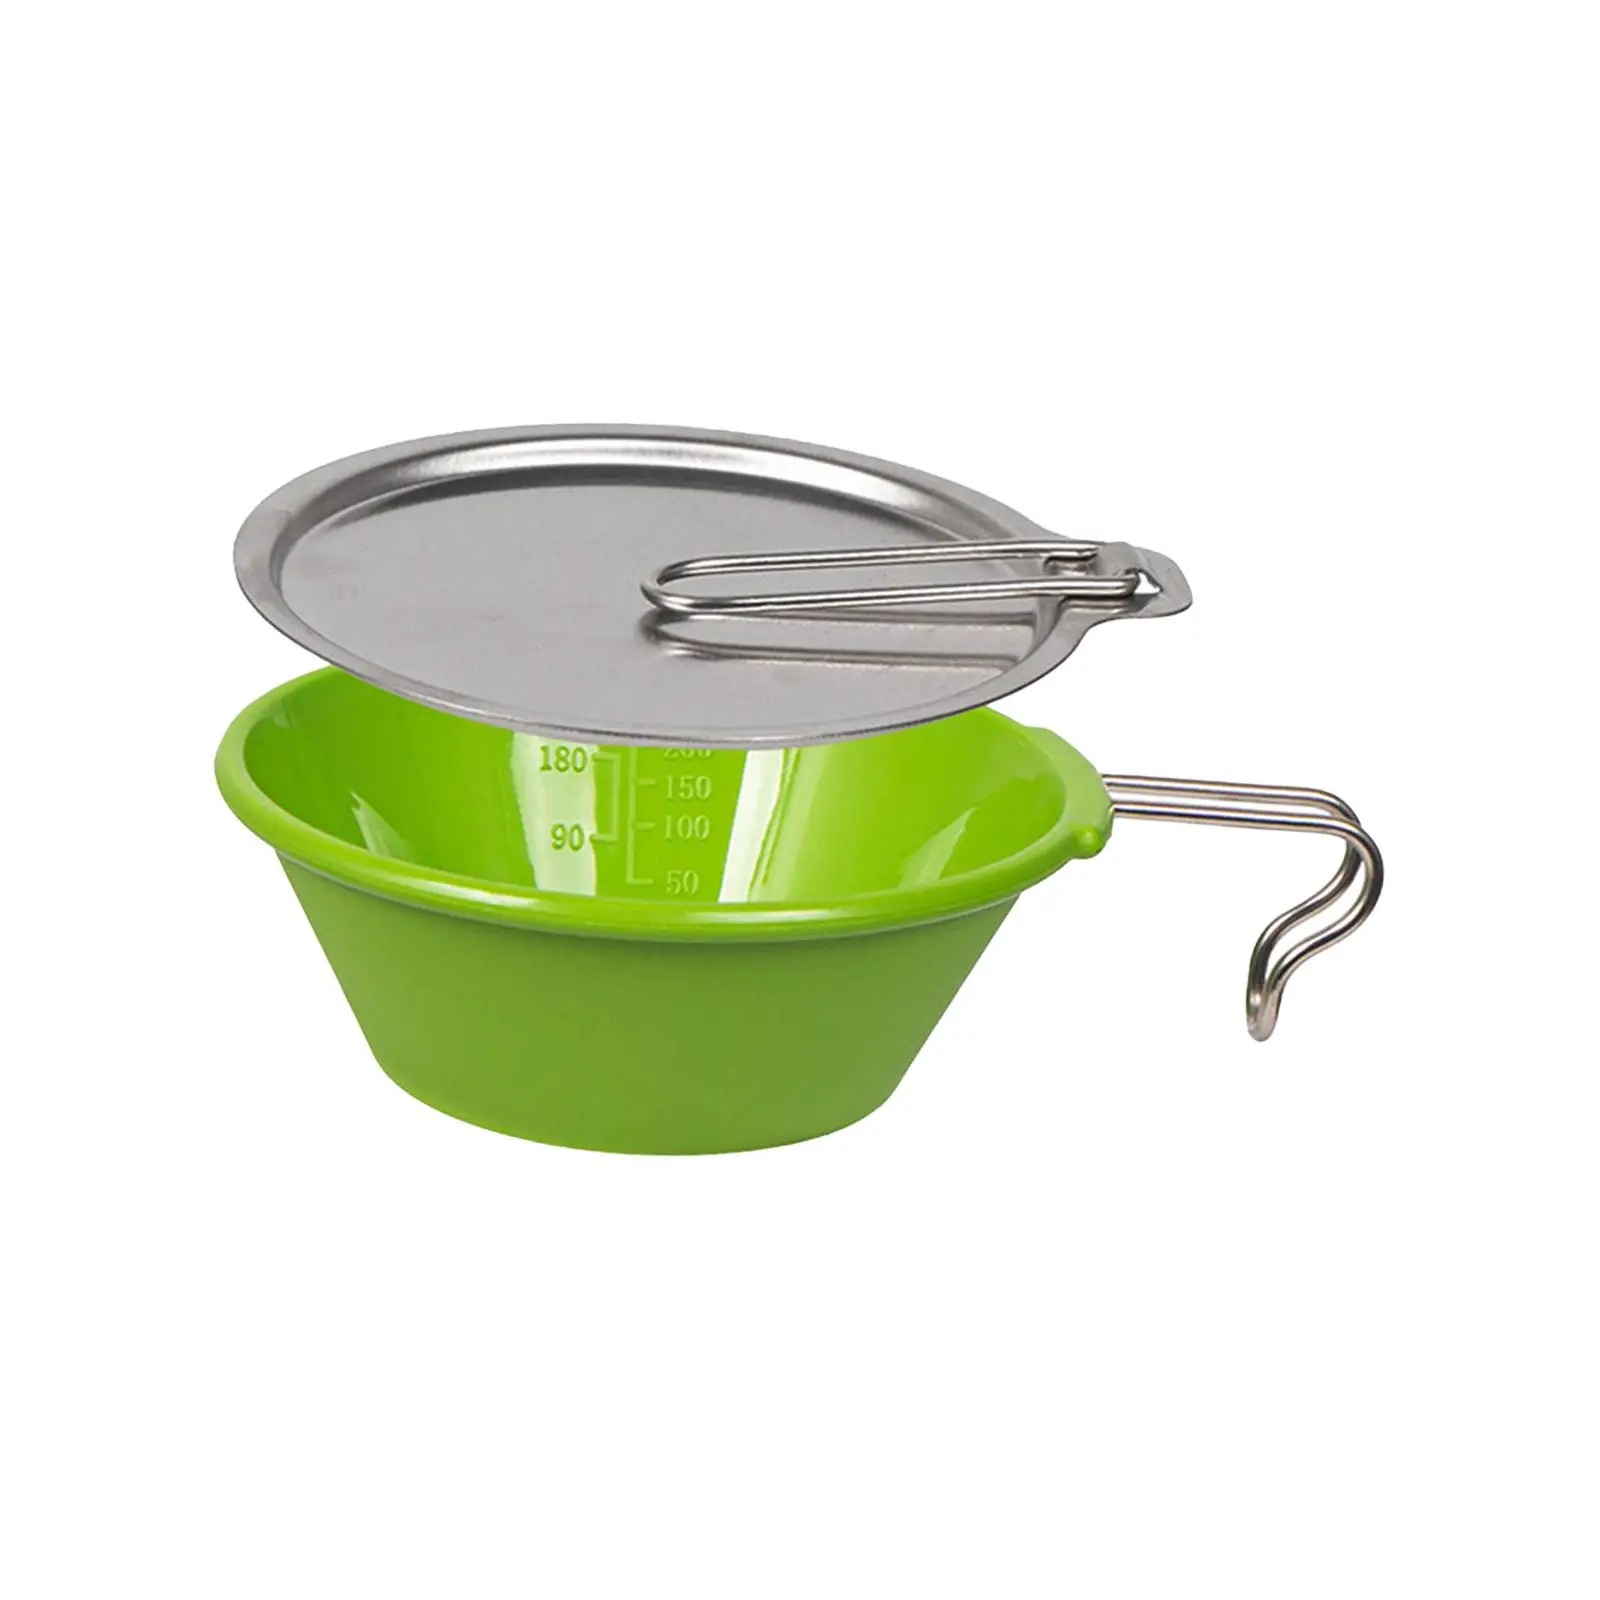 Camping Bowl with Handle Cooking Utensil Tableware Portable Cereal Bowl Outdoor Dinnerware for BBQ Beach Fishing Barbecue Travel